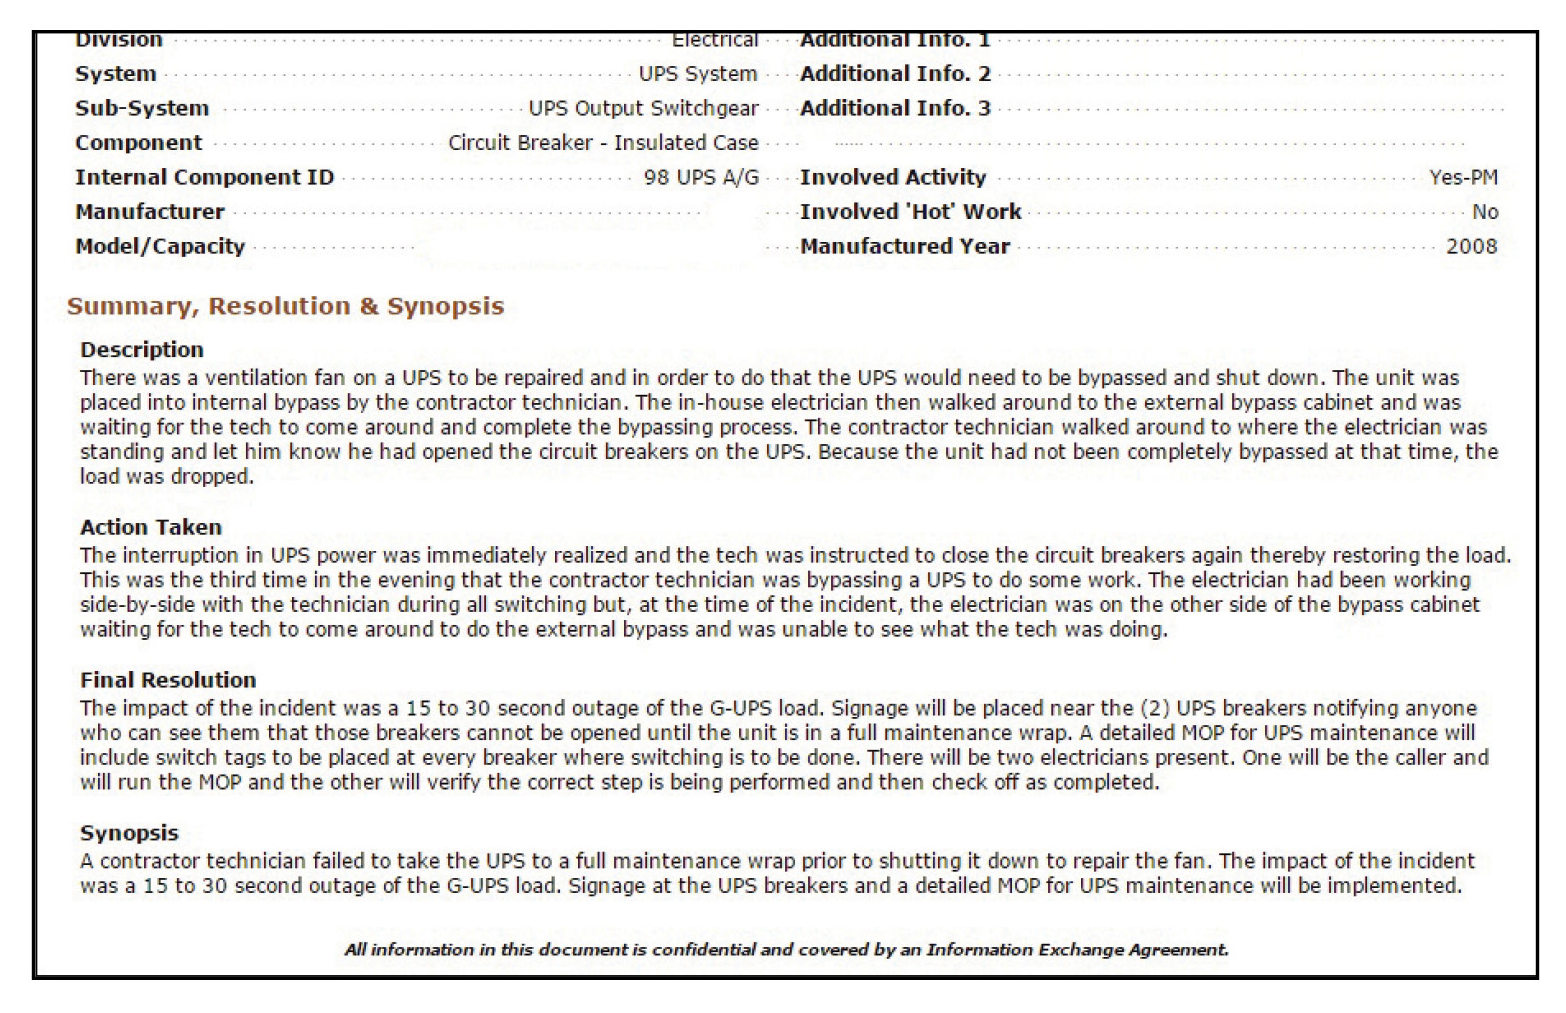 Figure 5. The detail page of the abnormal incident report selected for analysis. This is where the “story” of our incident is told.